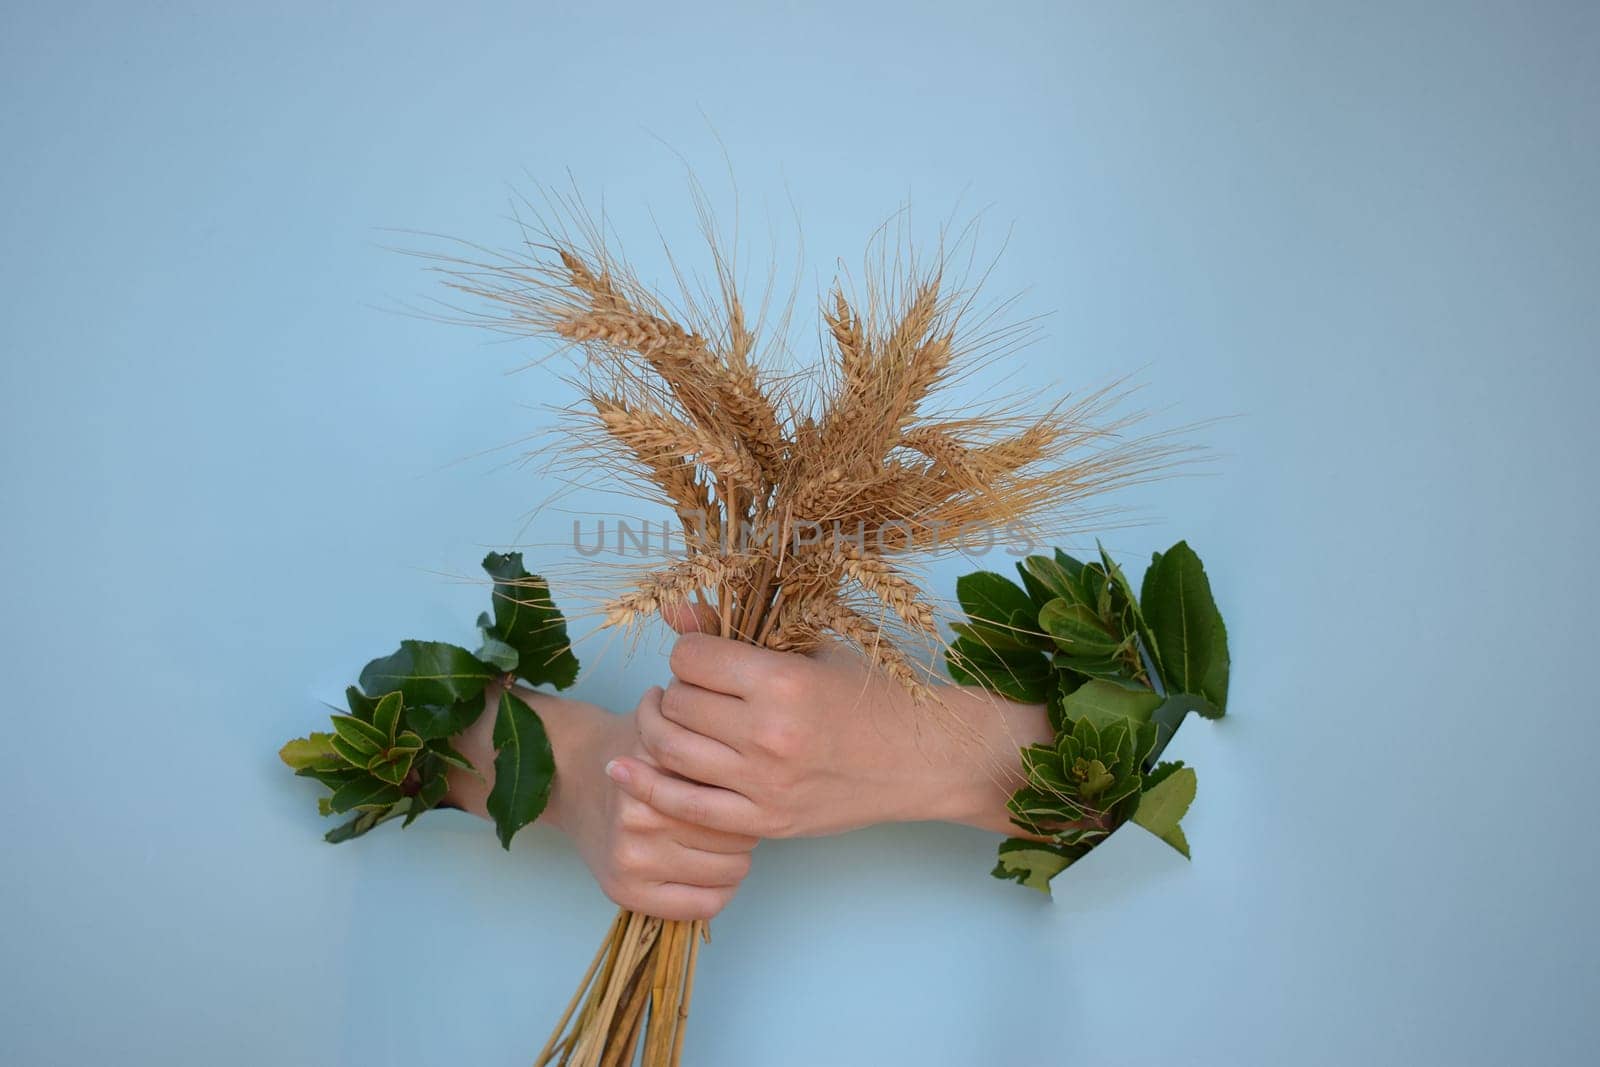 Ears of wheat in the hands of a young girl, on a blue background.